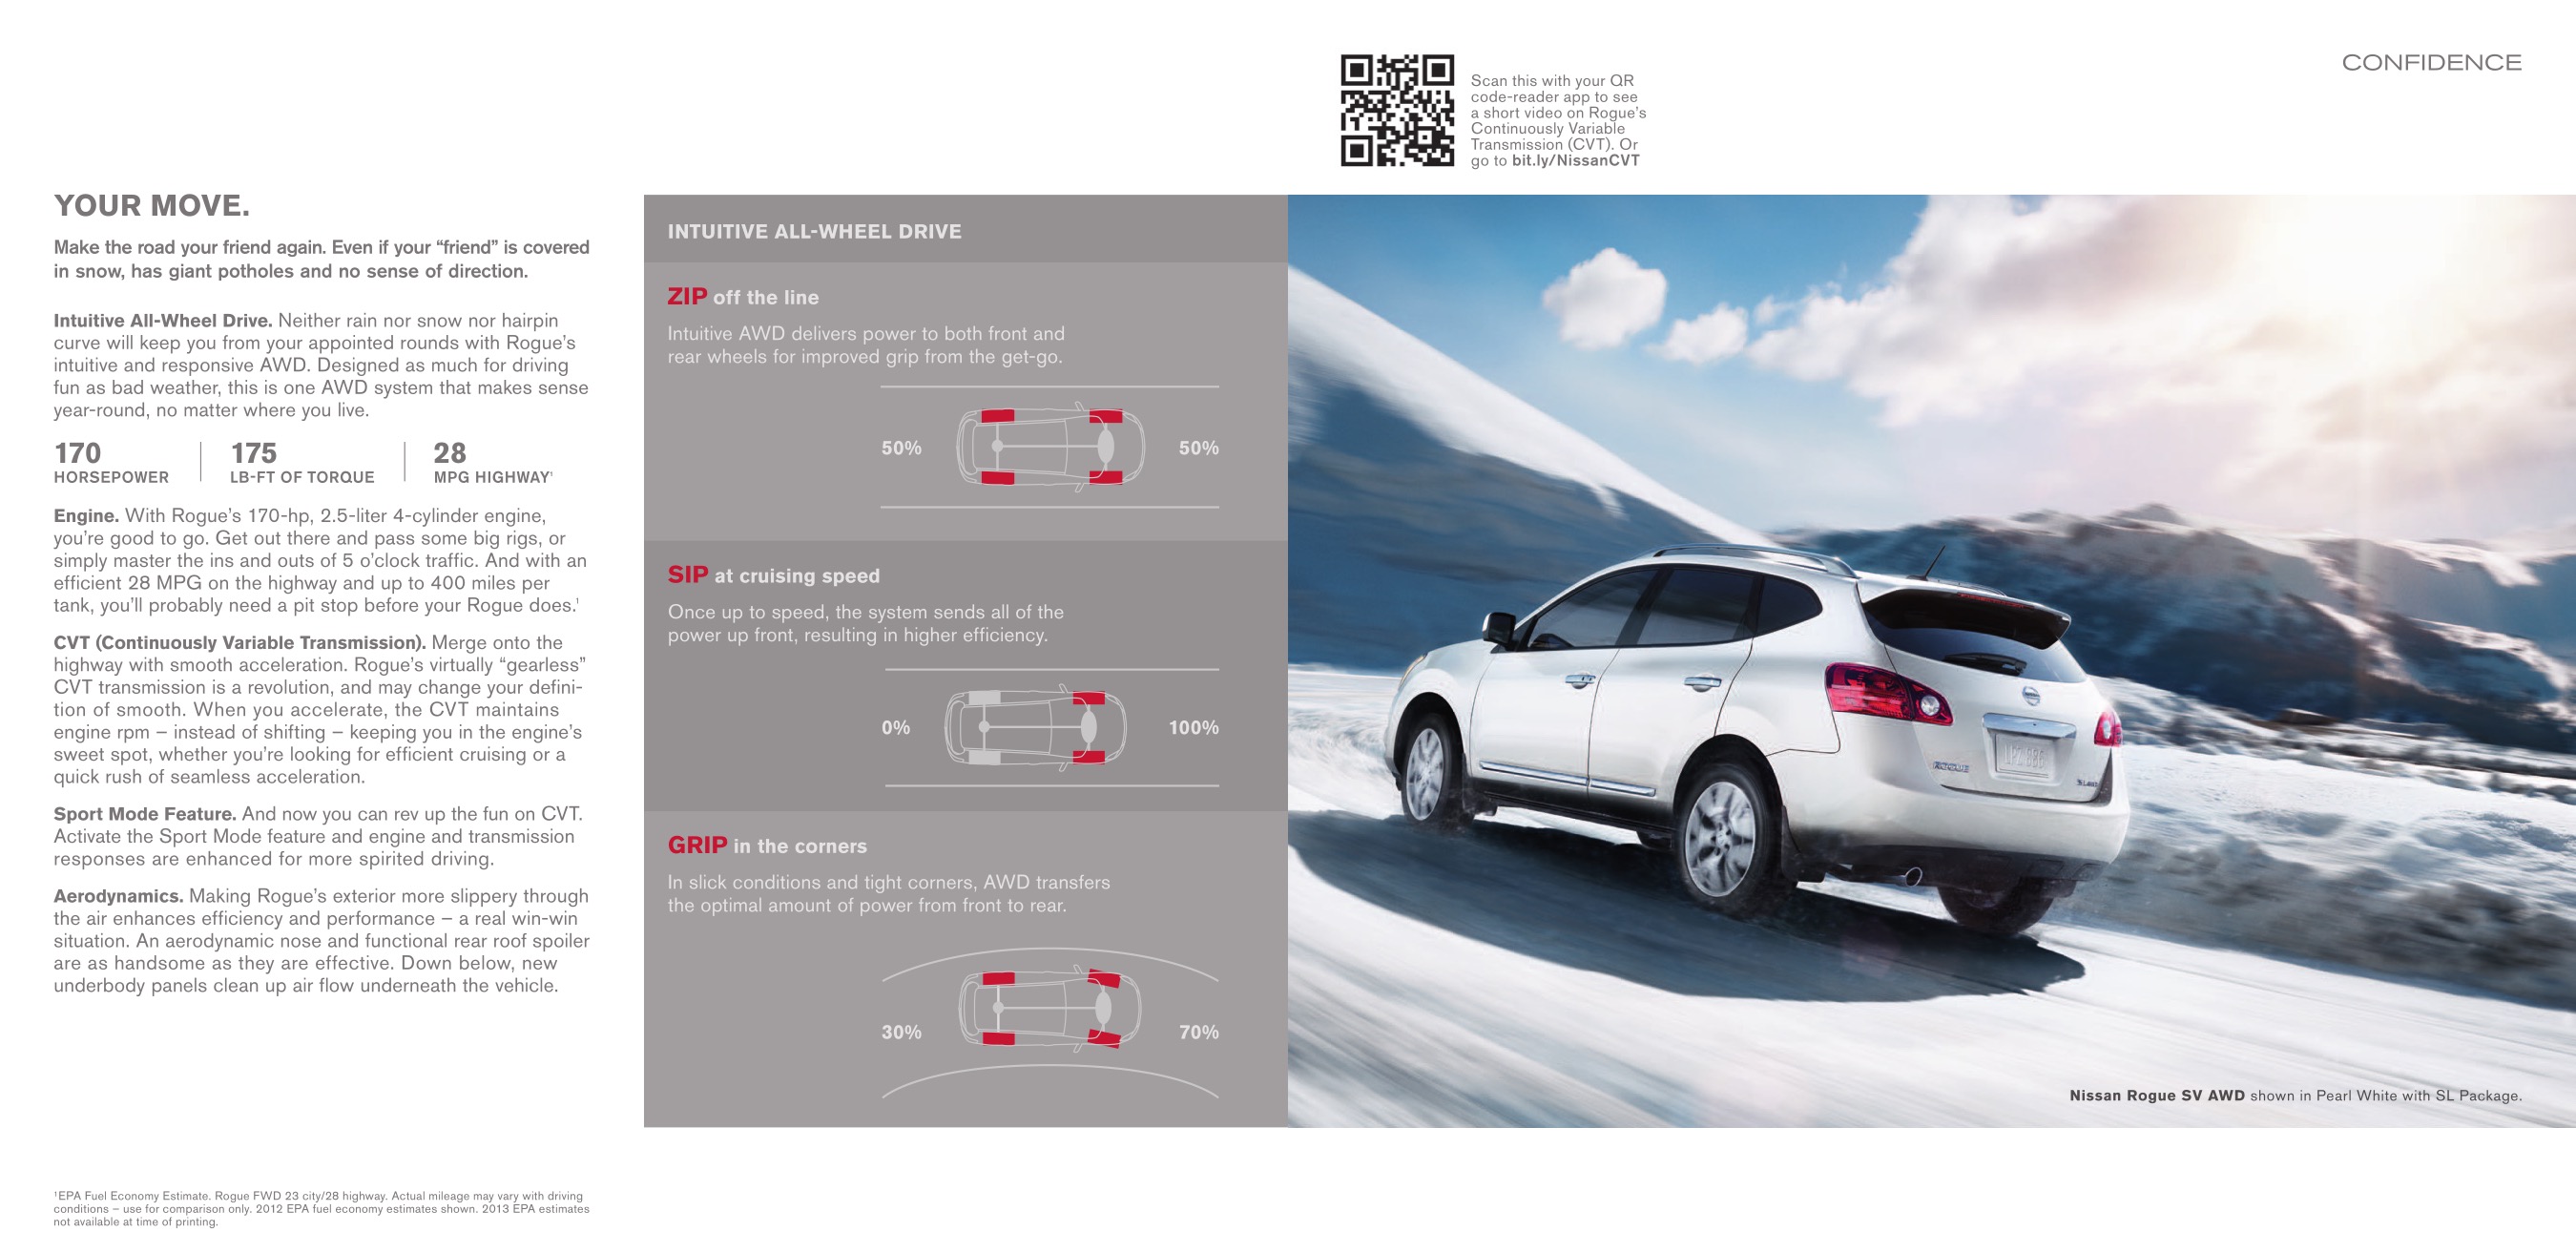 2013 Nissan Rogue Brochure Page 6